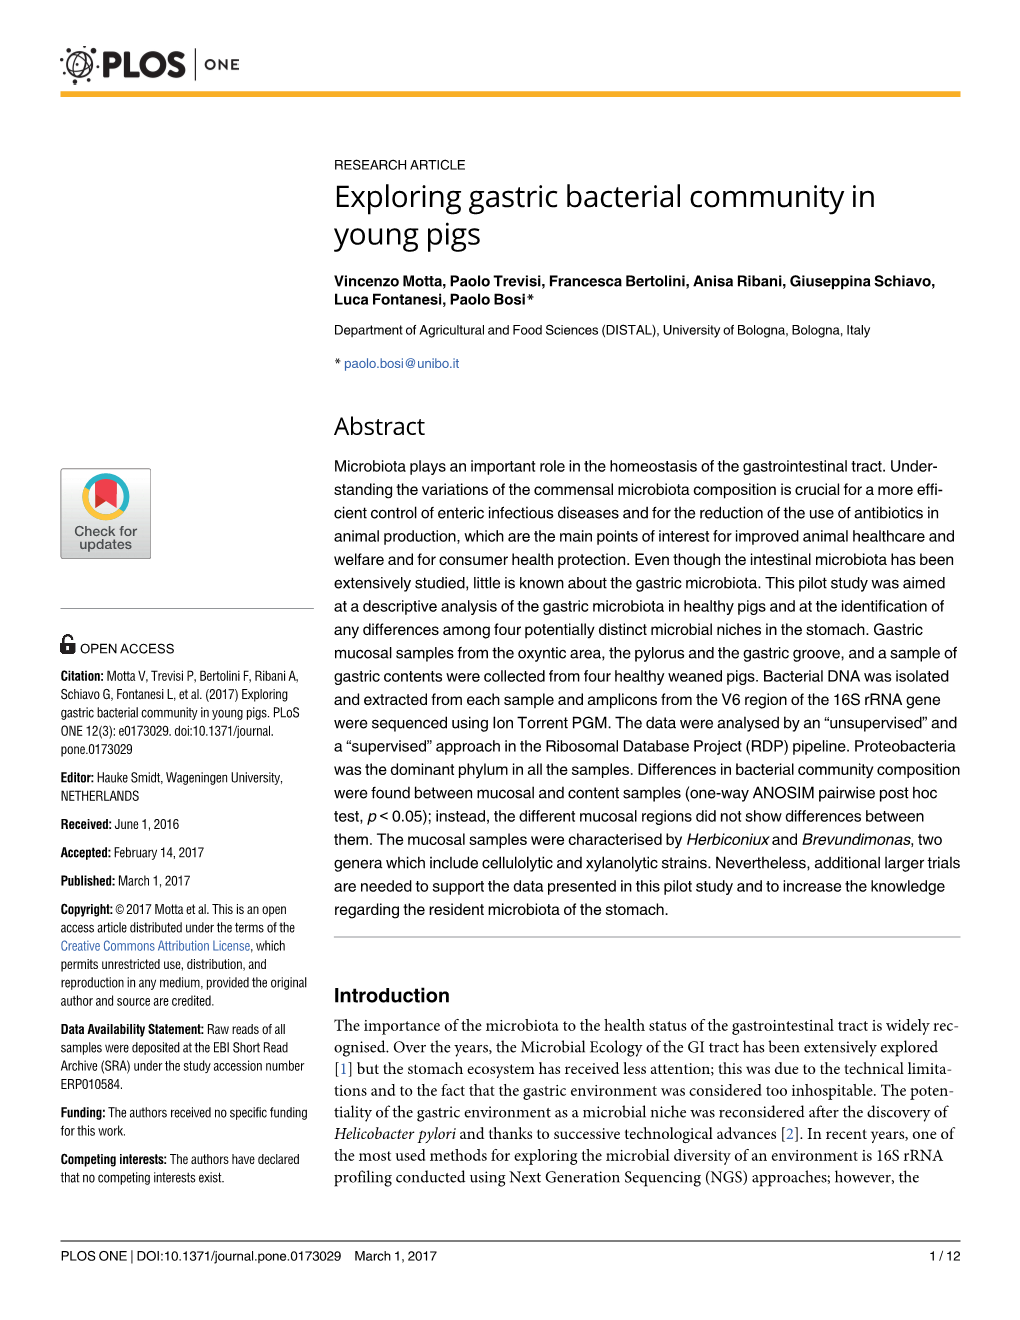 Exploring Gastric Bacterial Community in Young Pigs